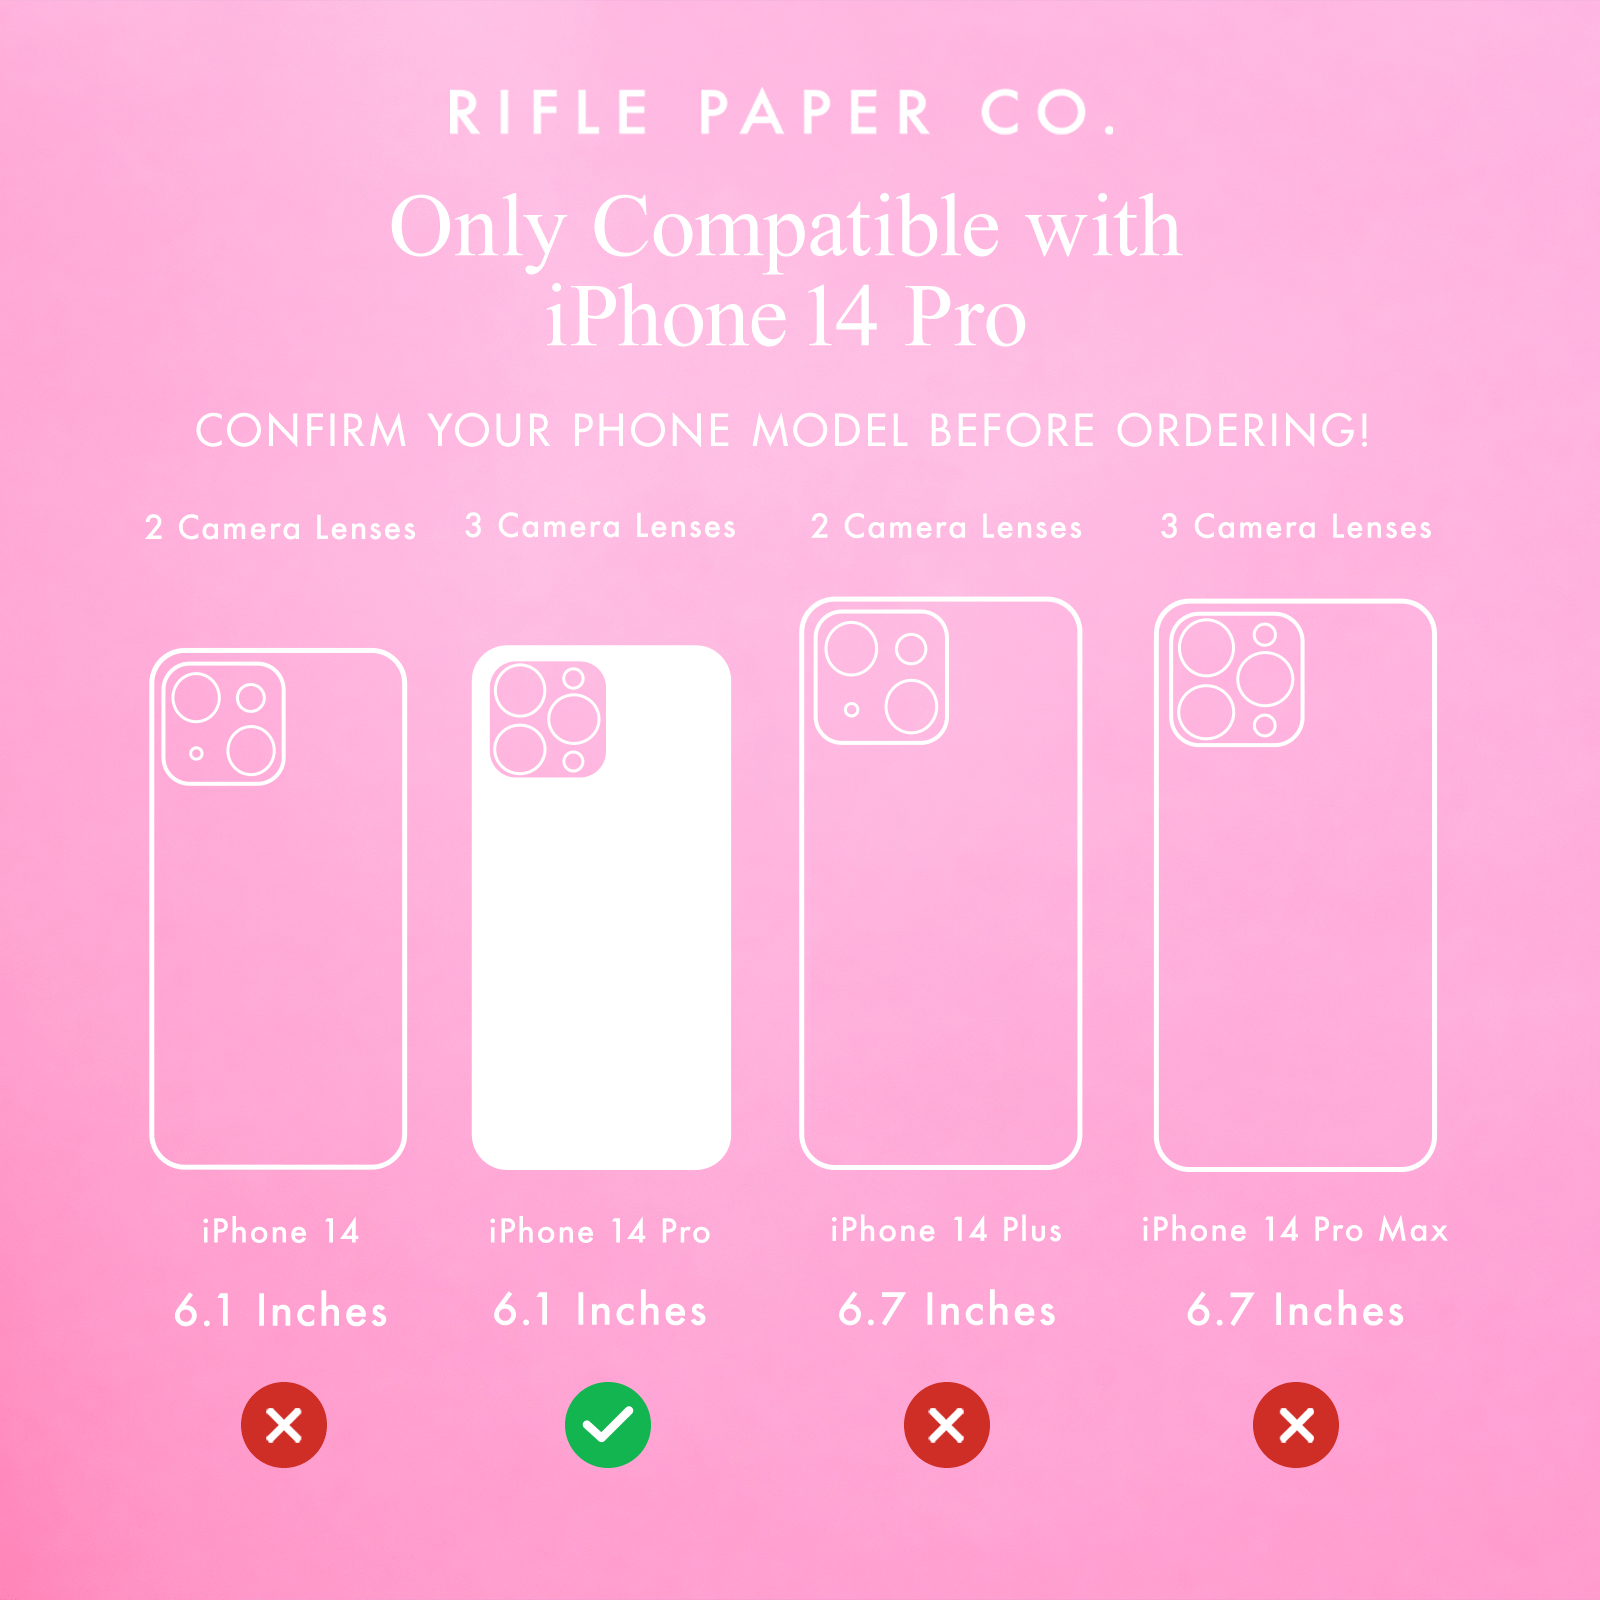 RIFLE PAPER CO. ONLY COMPATIBLE WITH IPHONE 14 PRO. CONFIRM YOUR PHONE MODEL BEFORE ORDERING.